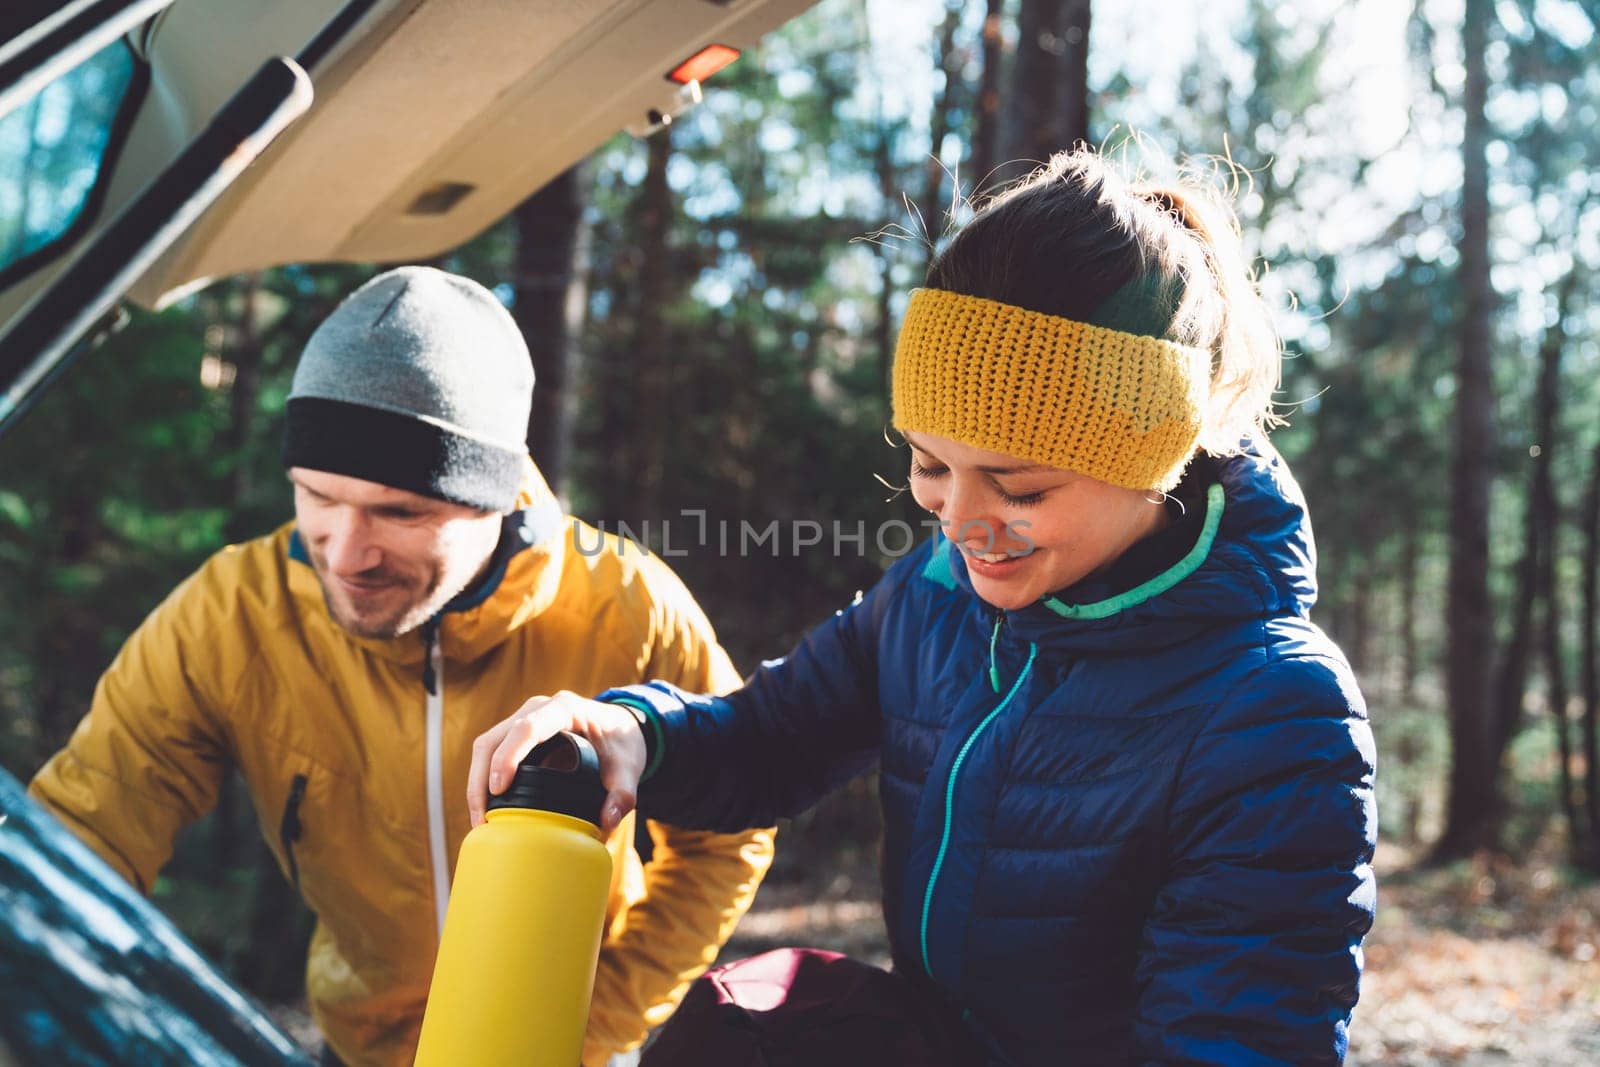 Smiling mountaineering couple packing their things into backpacks in the car trunk by VisualProductions